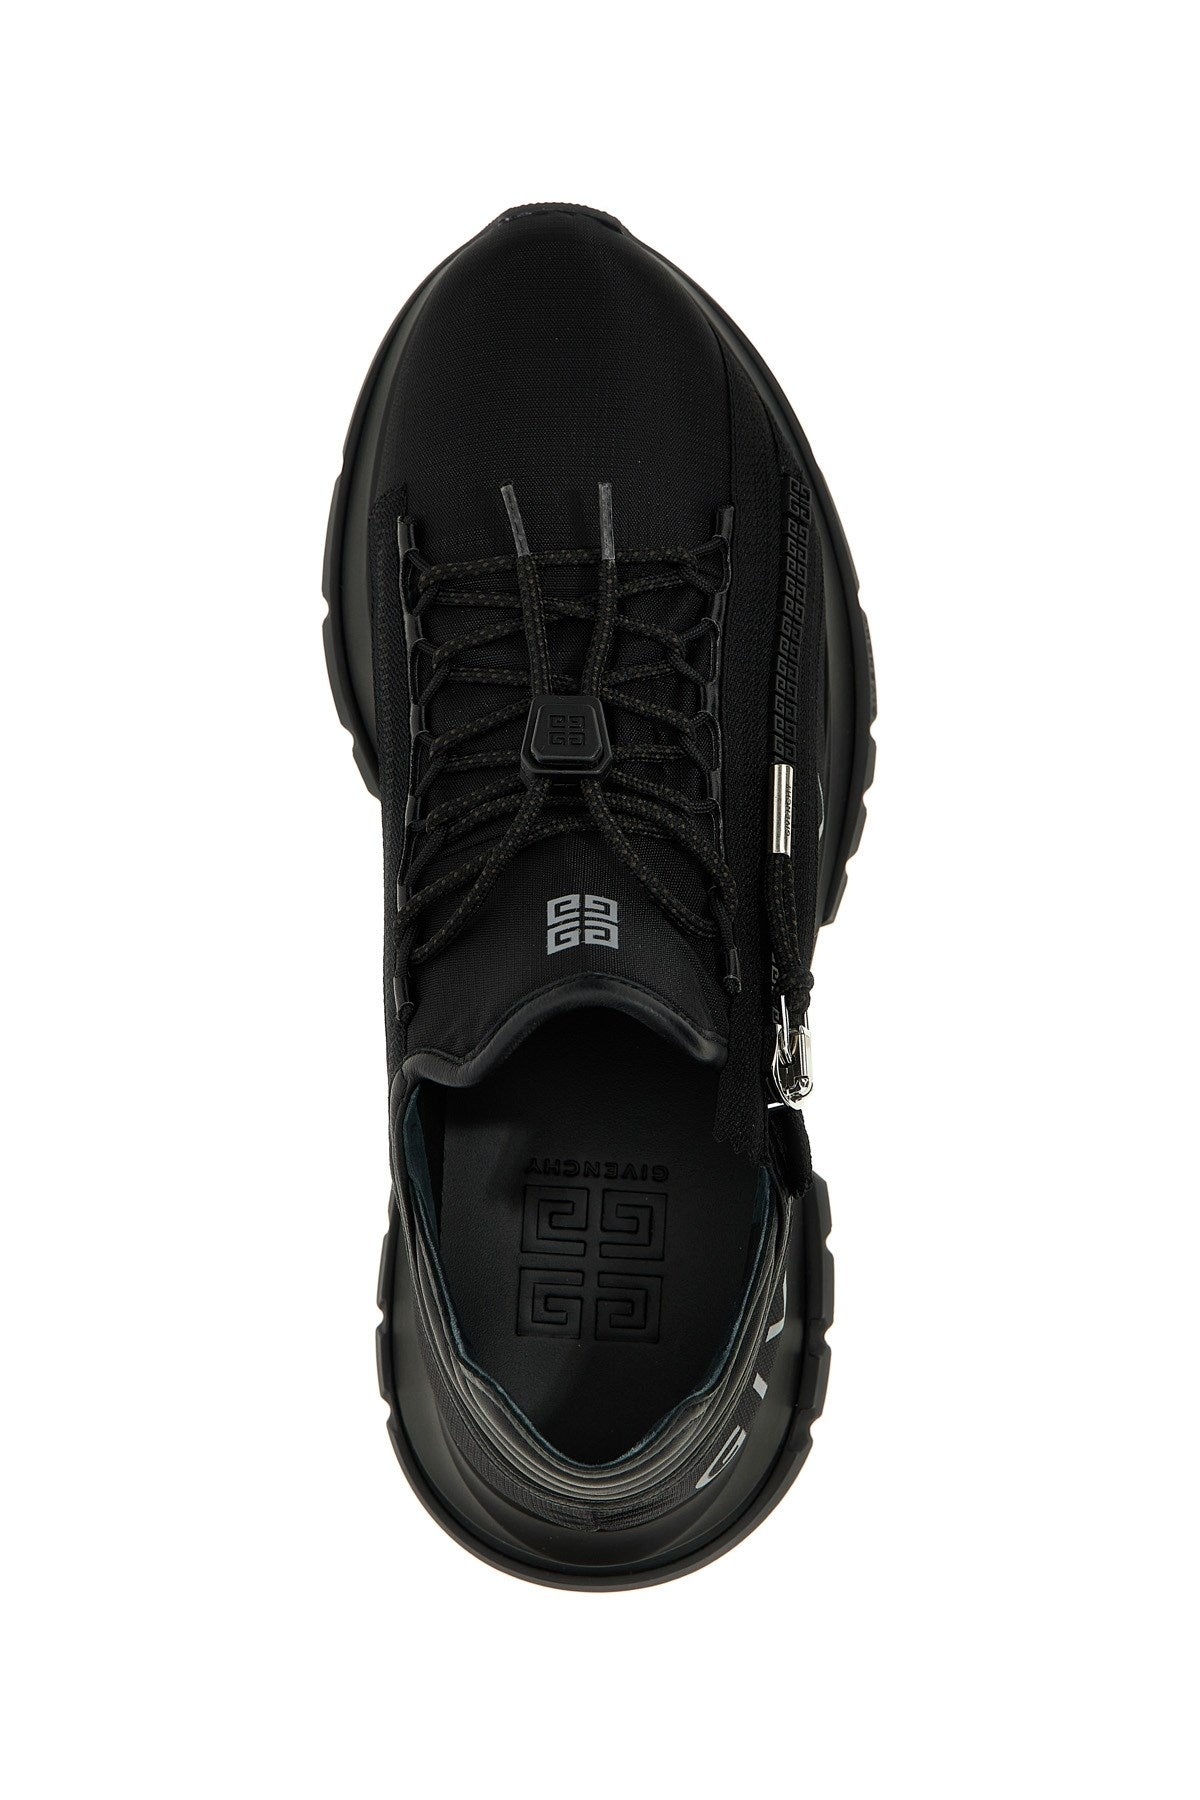 Givenchy Men 'Spectre' Sneakers - 3